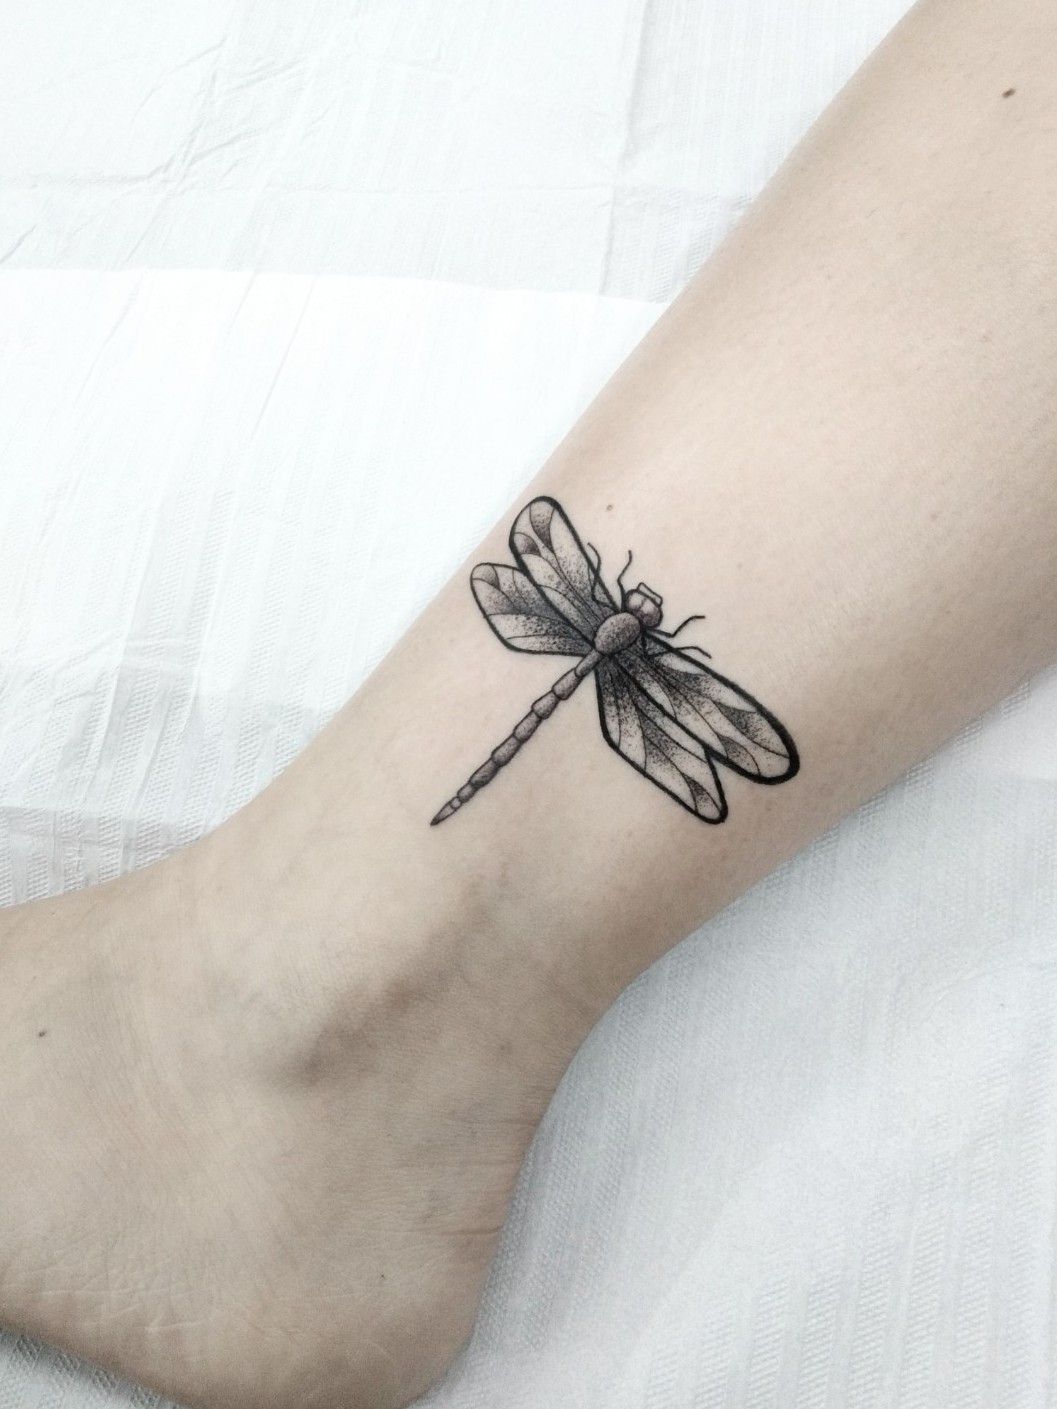 Bamboo with Dragonfly Tattoo by Mukesh Waghela The Best Tattoo Artist in  Goa India  Goa Tattoo Center